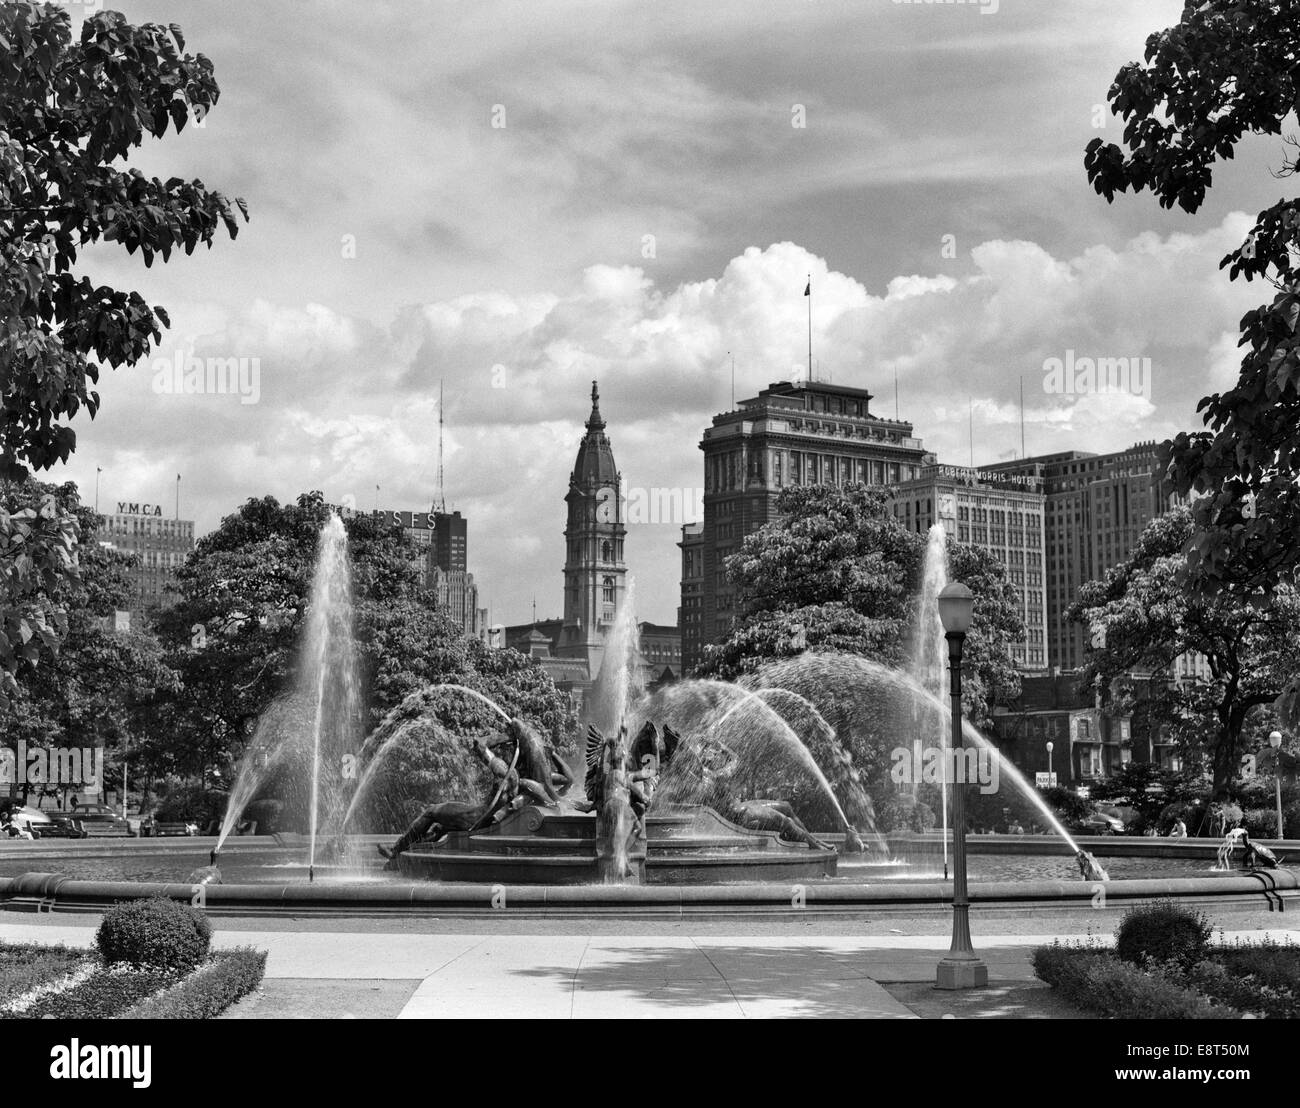 1950s PHILADELPHIA PA USA LOOKING SOUTHEAST PAST SWANN FOUNTAIN AT LOGAN CIRCLE TO CITY HALL TOWER Stock Photo